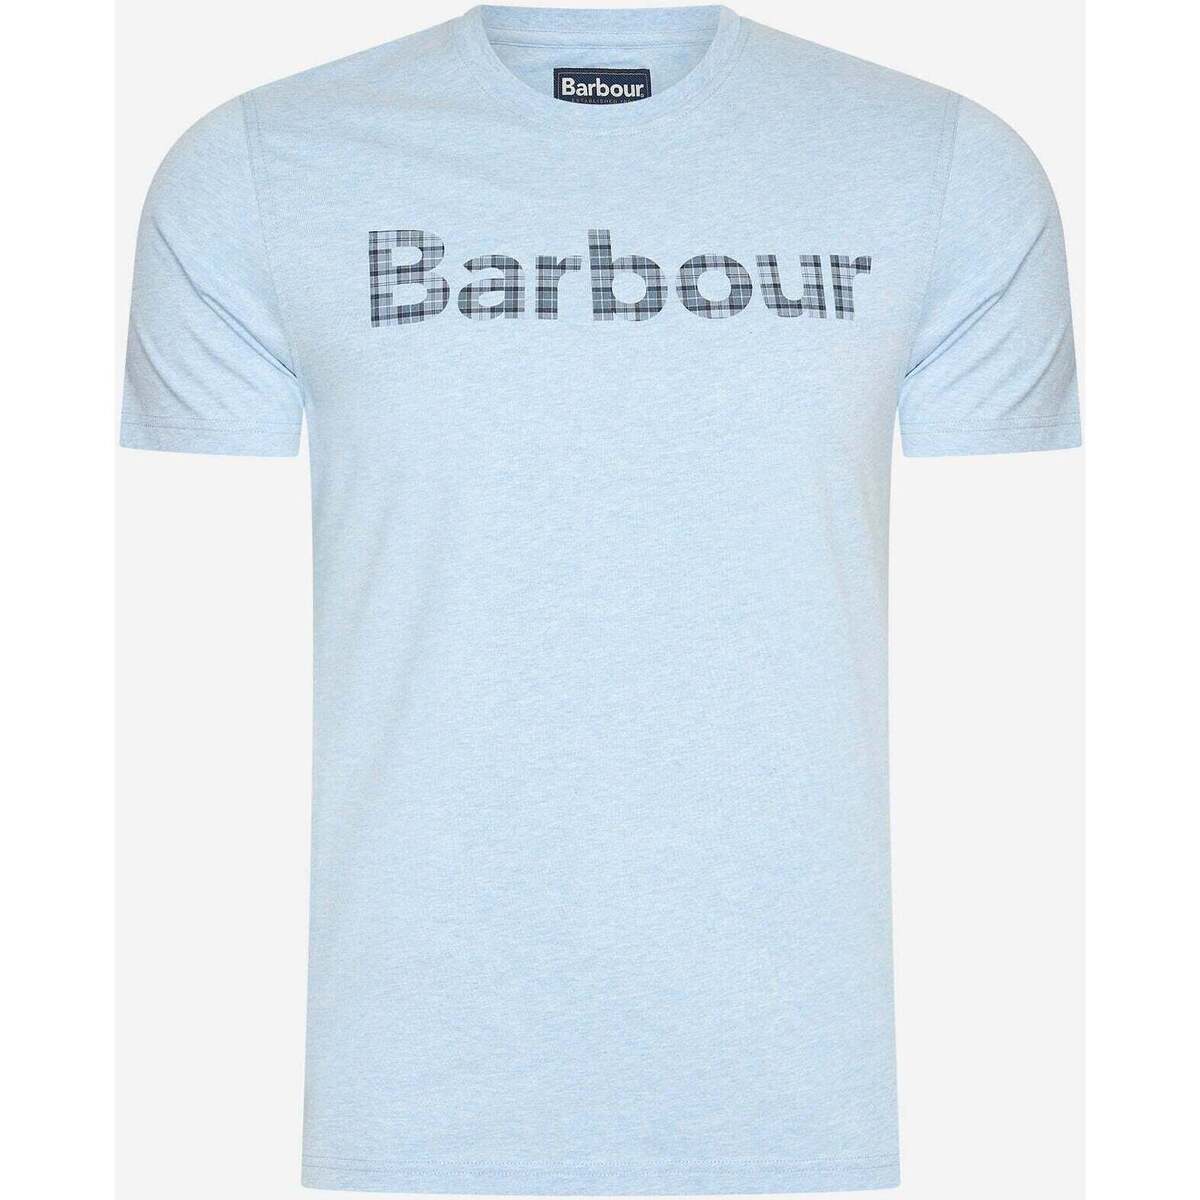 Textiel Heren T-shirts & Polo’s Barbour Kilwick tee Other